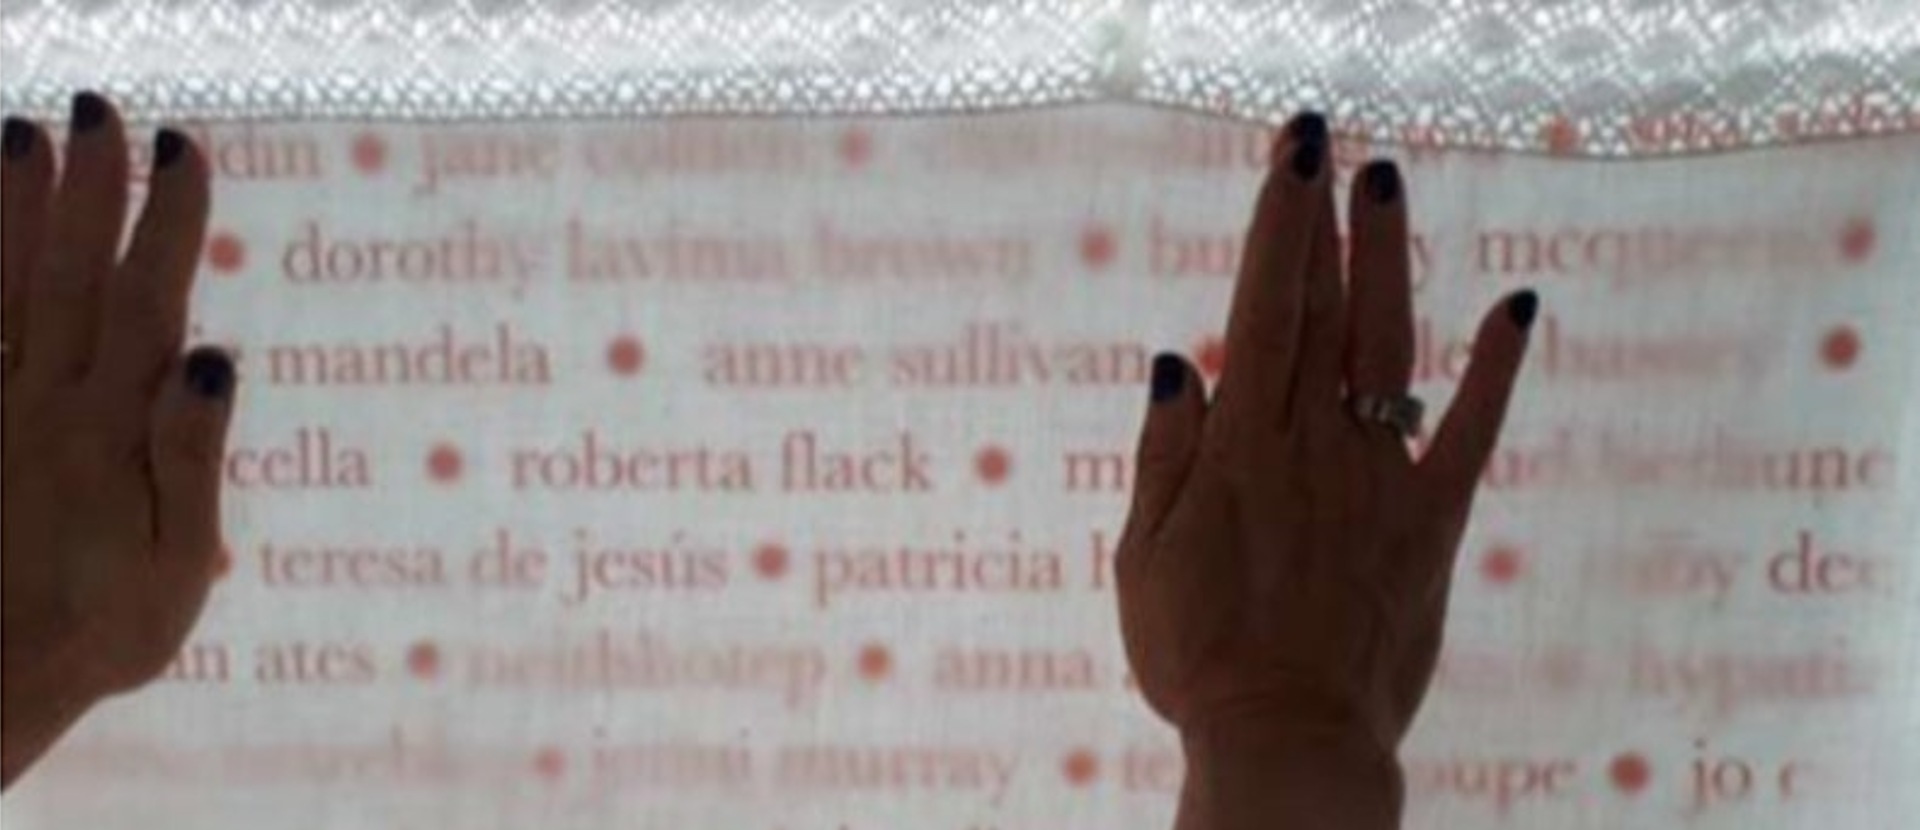 A piece of textile with women's names written on. It is being held up against a light by two hands that are visible.